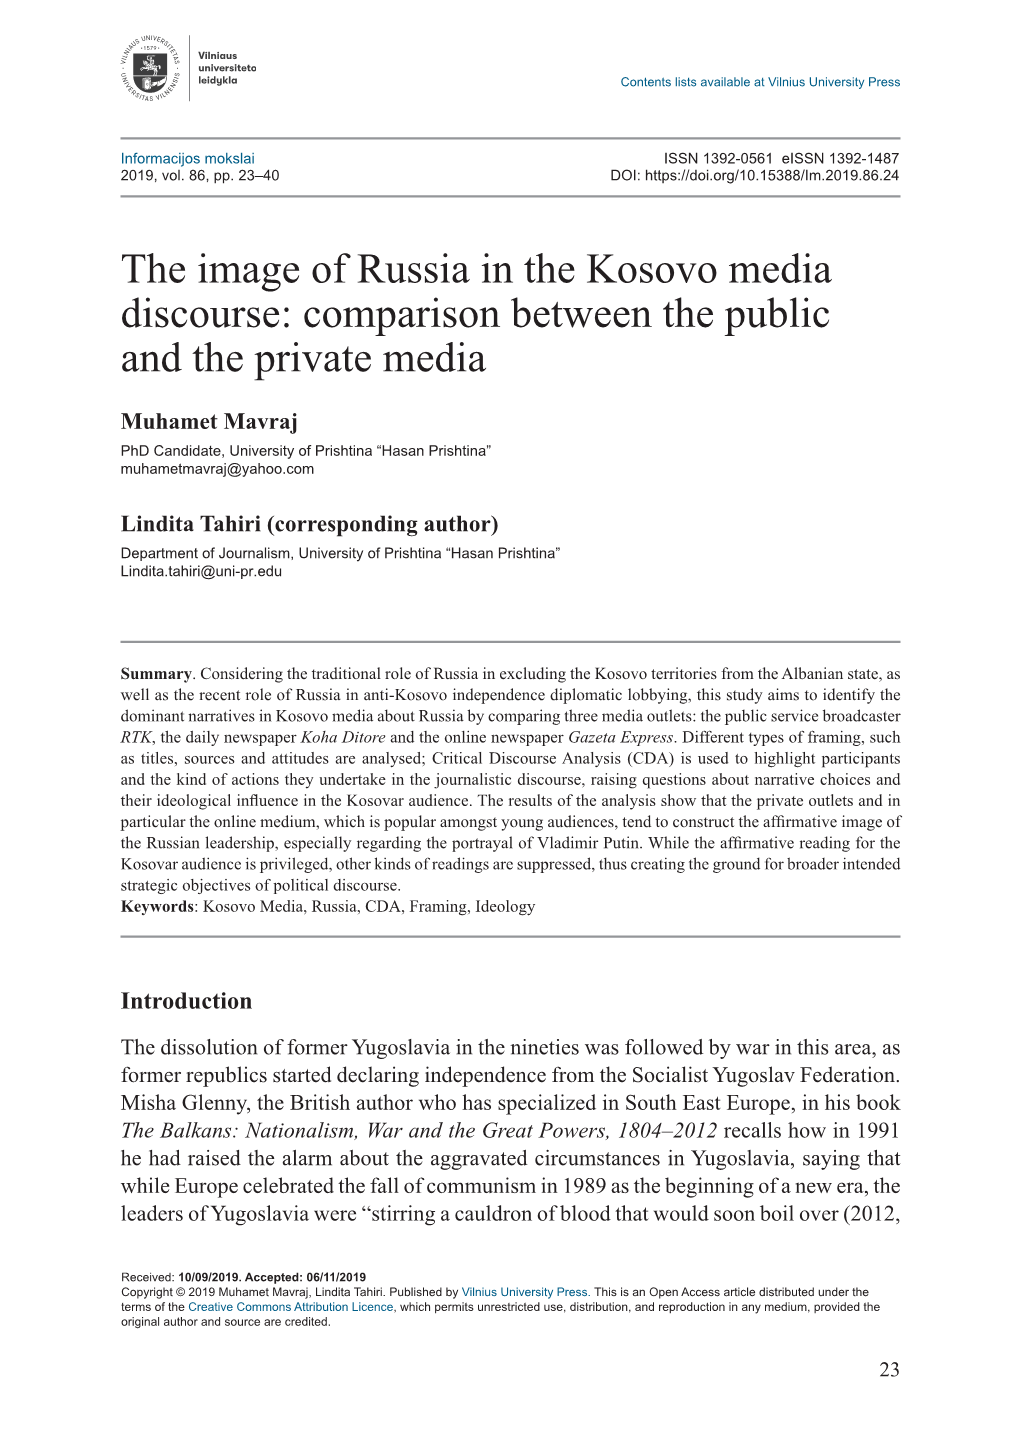 The Image of Russia in the Kosovo Media Discourse: Comparison Between the Public and the Private Media